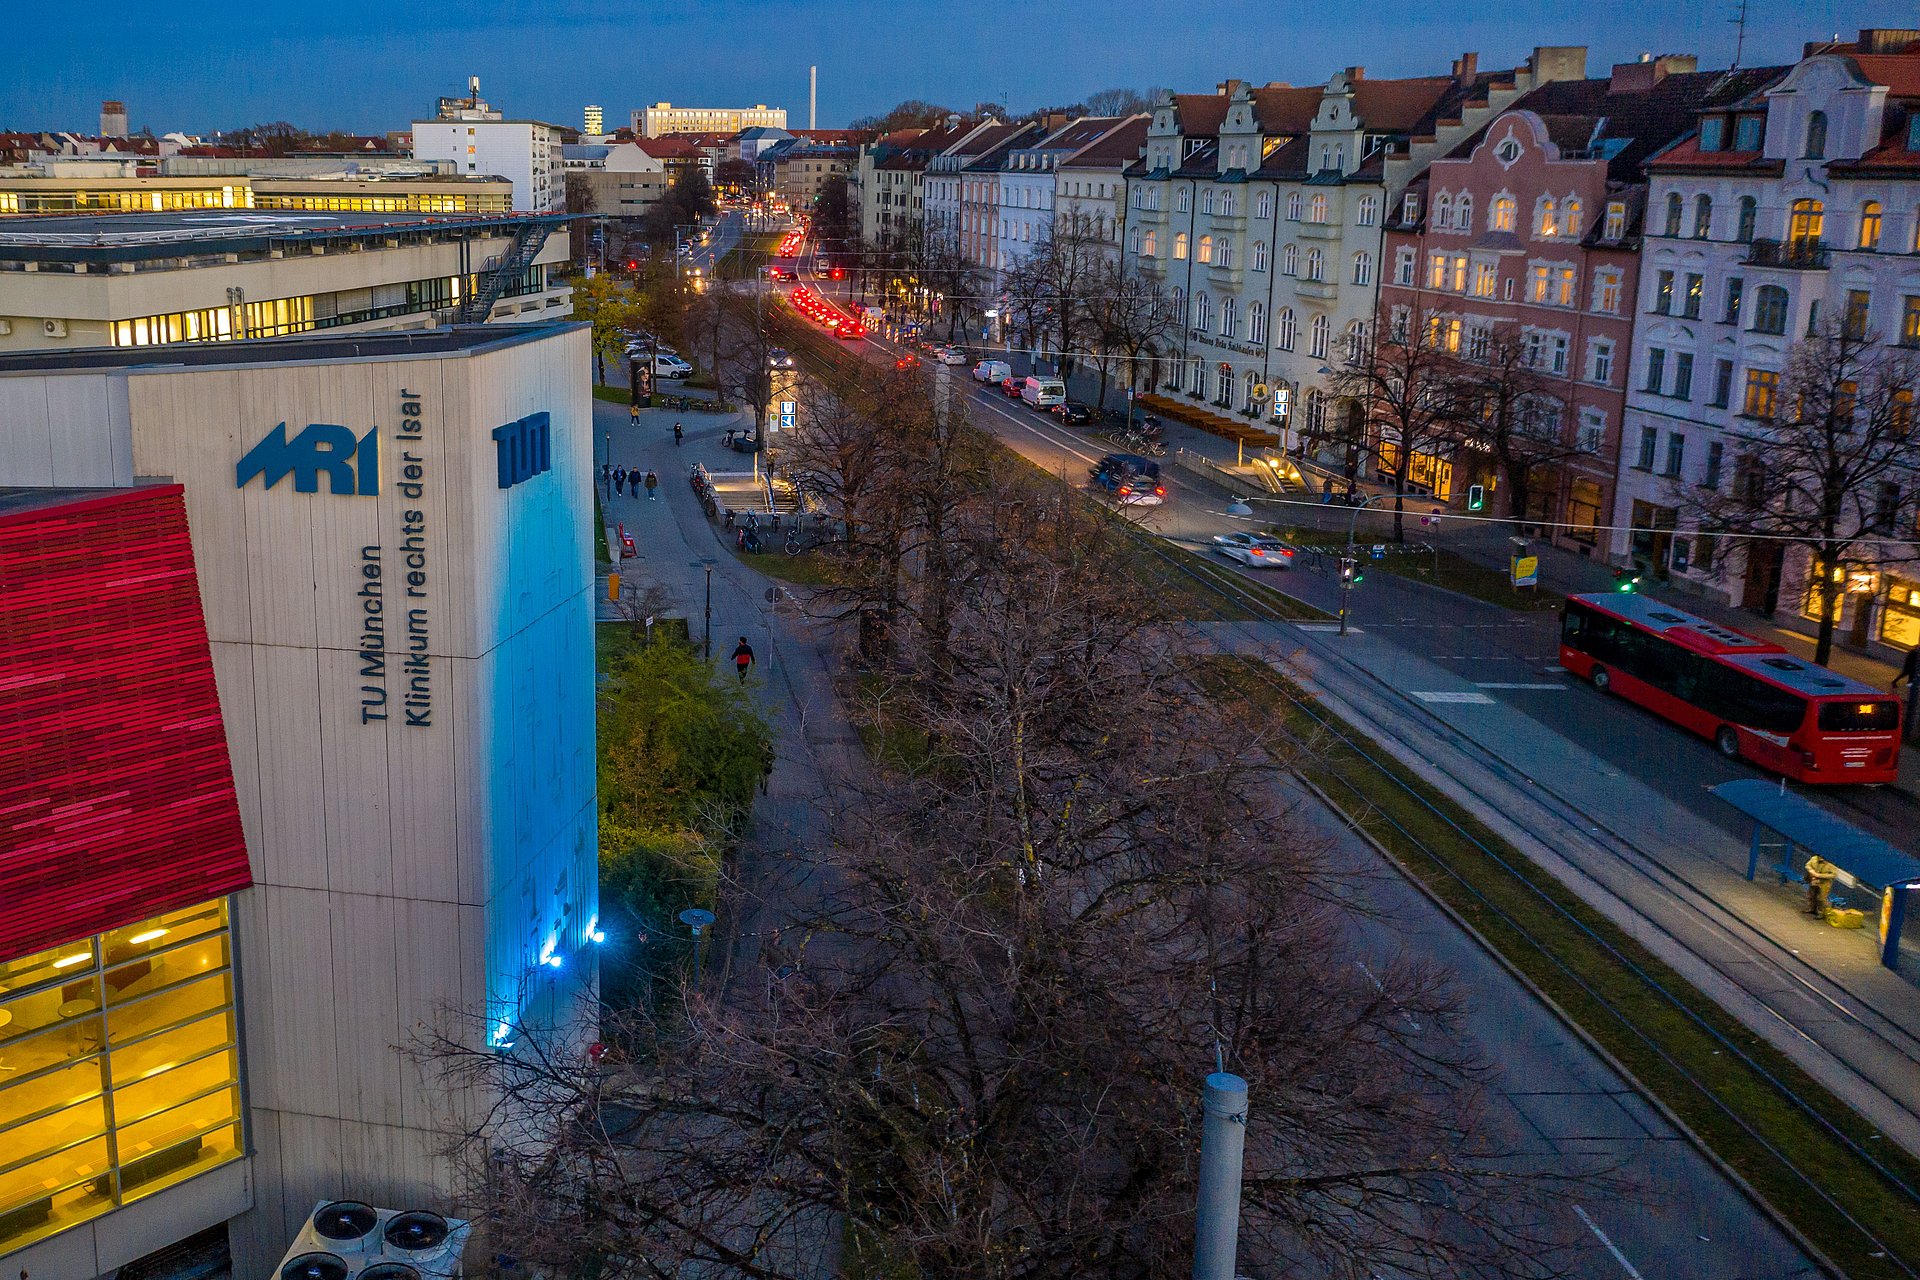 For the WHO campaign, the TUM illuminated its lecture hall building at the Klinikum rechts der Isar in the color teal.